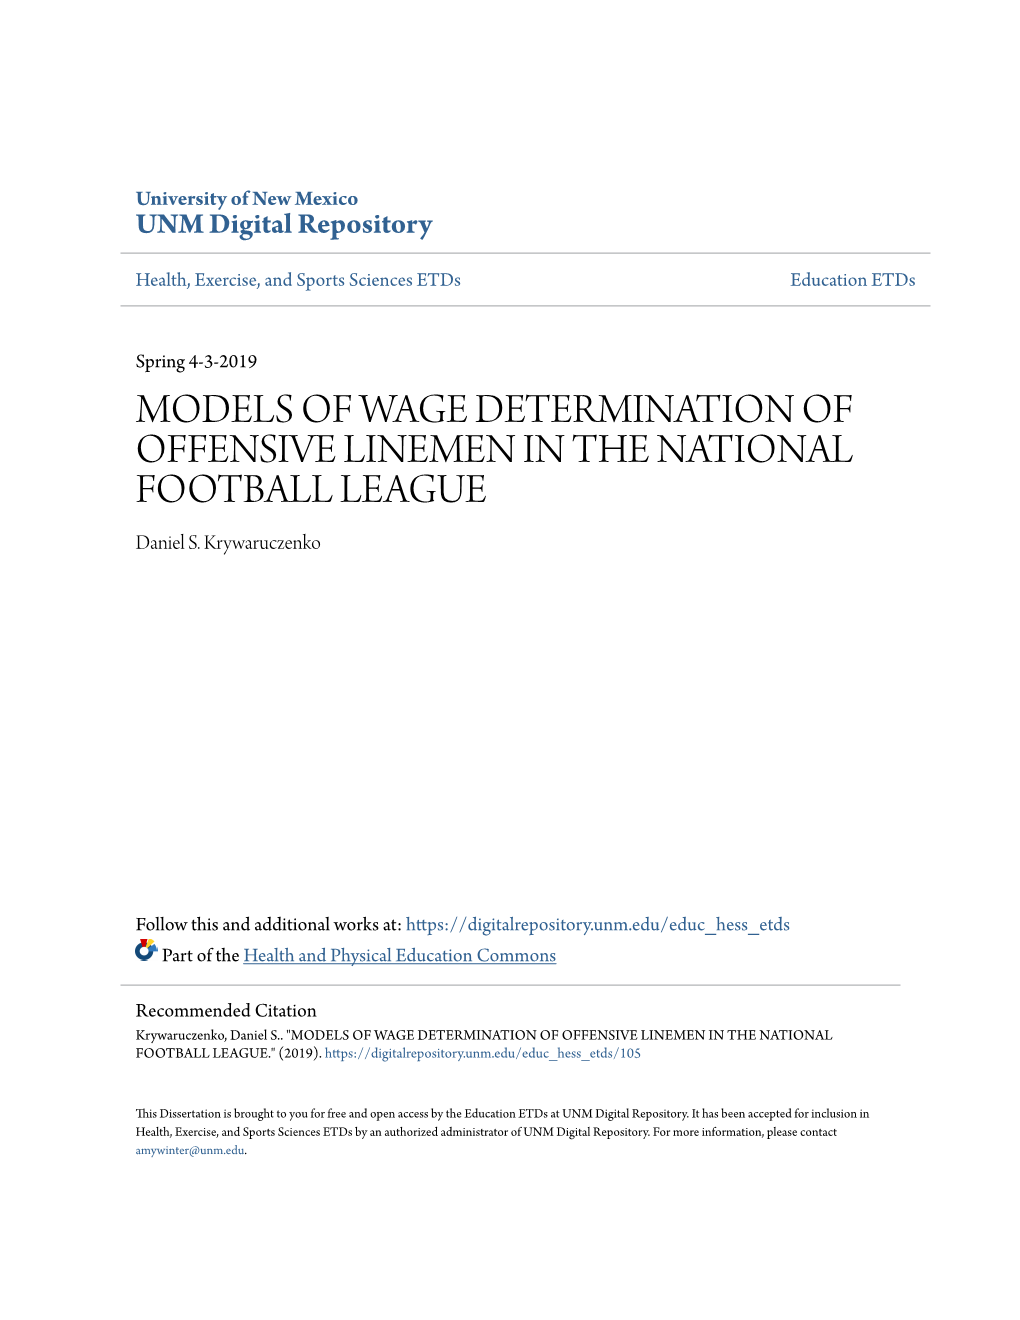 MODELS of WAGE DETERMINATION of OFFENSIVE LINEMEN in the NATIONAL FOOTBALL LEAGUE Daniel S